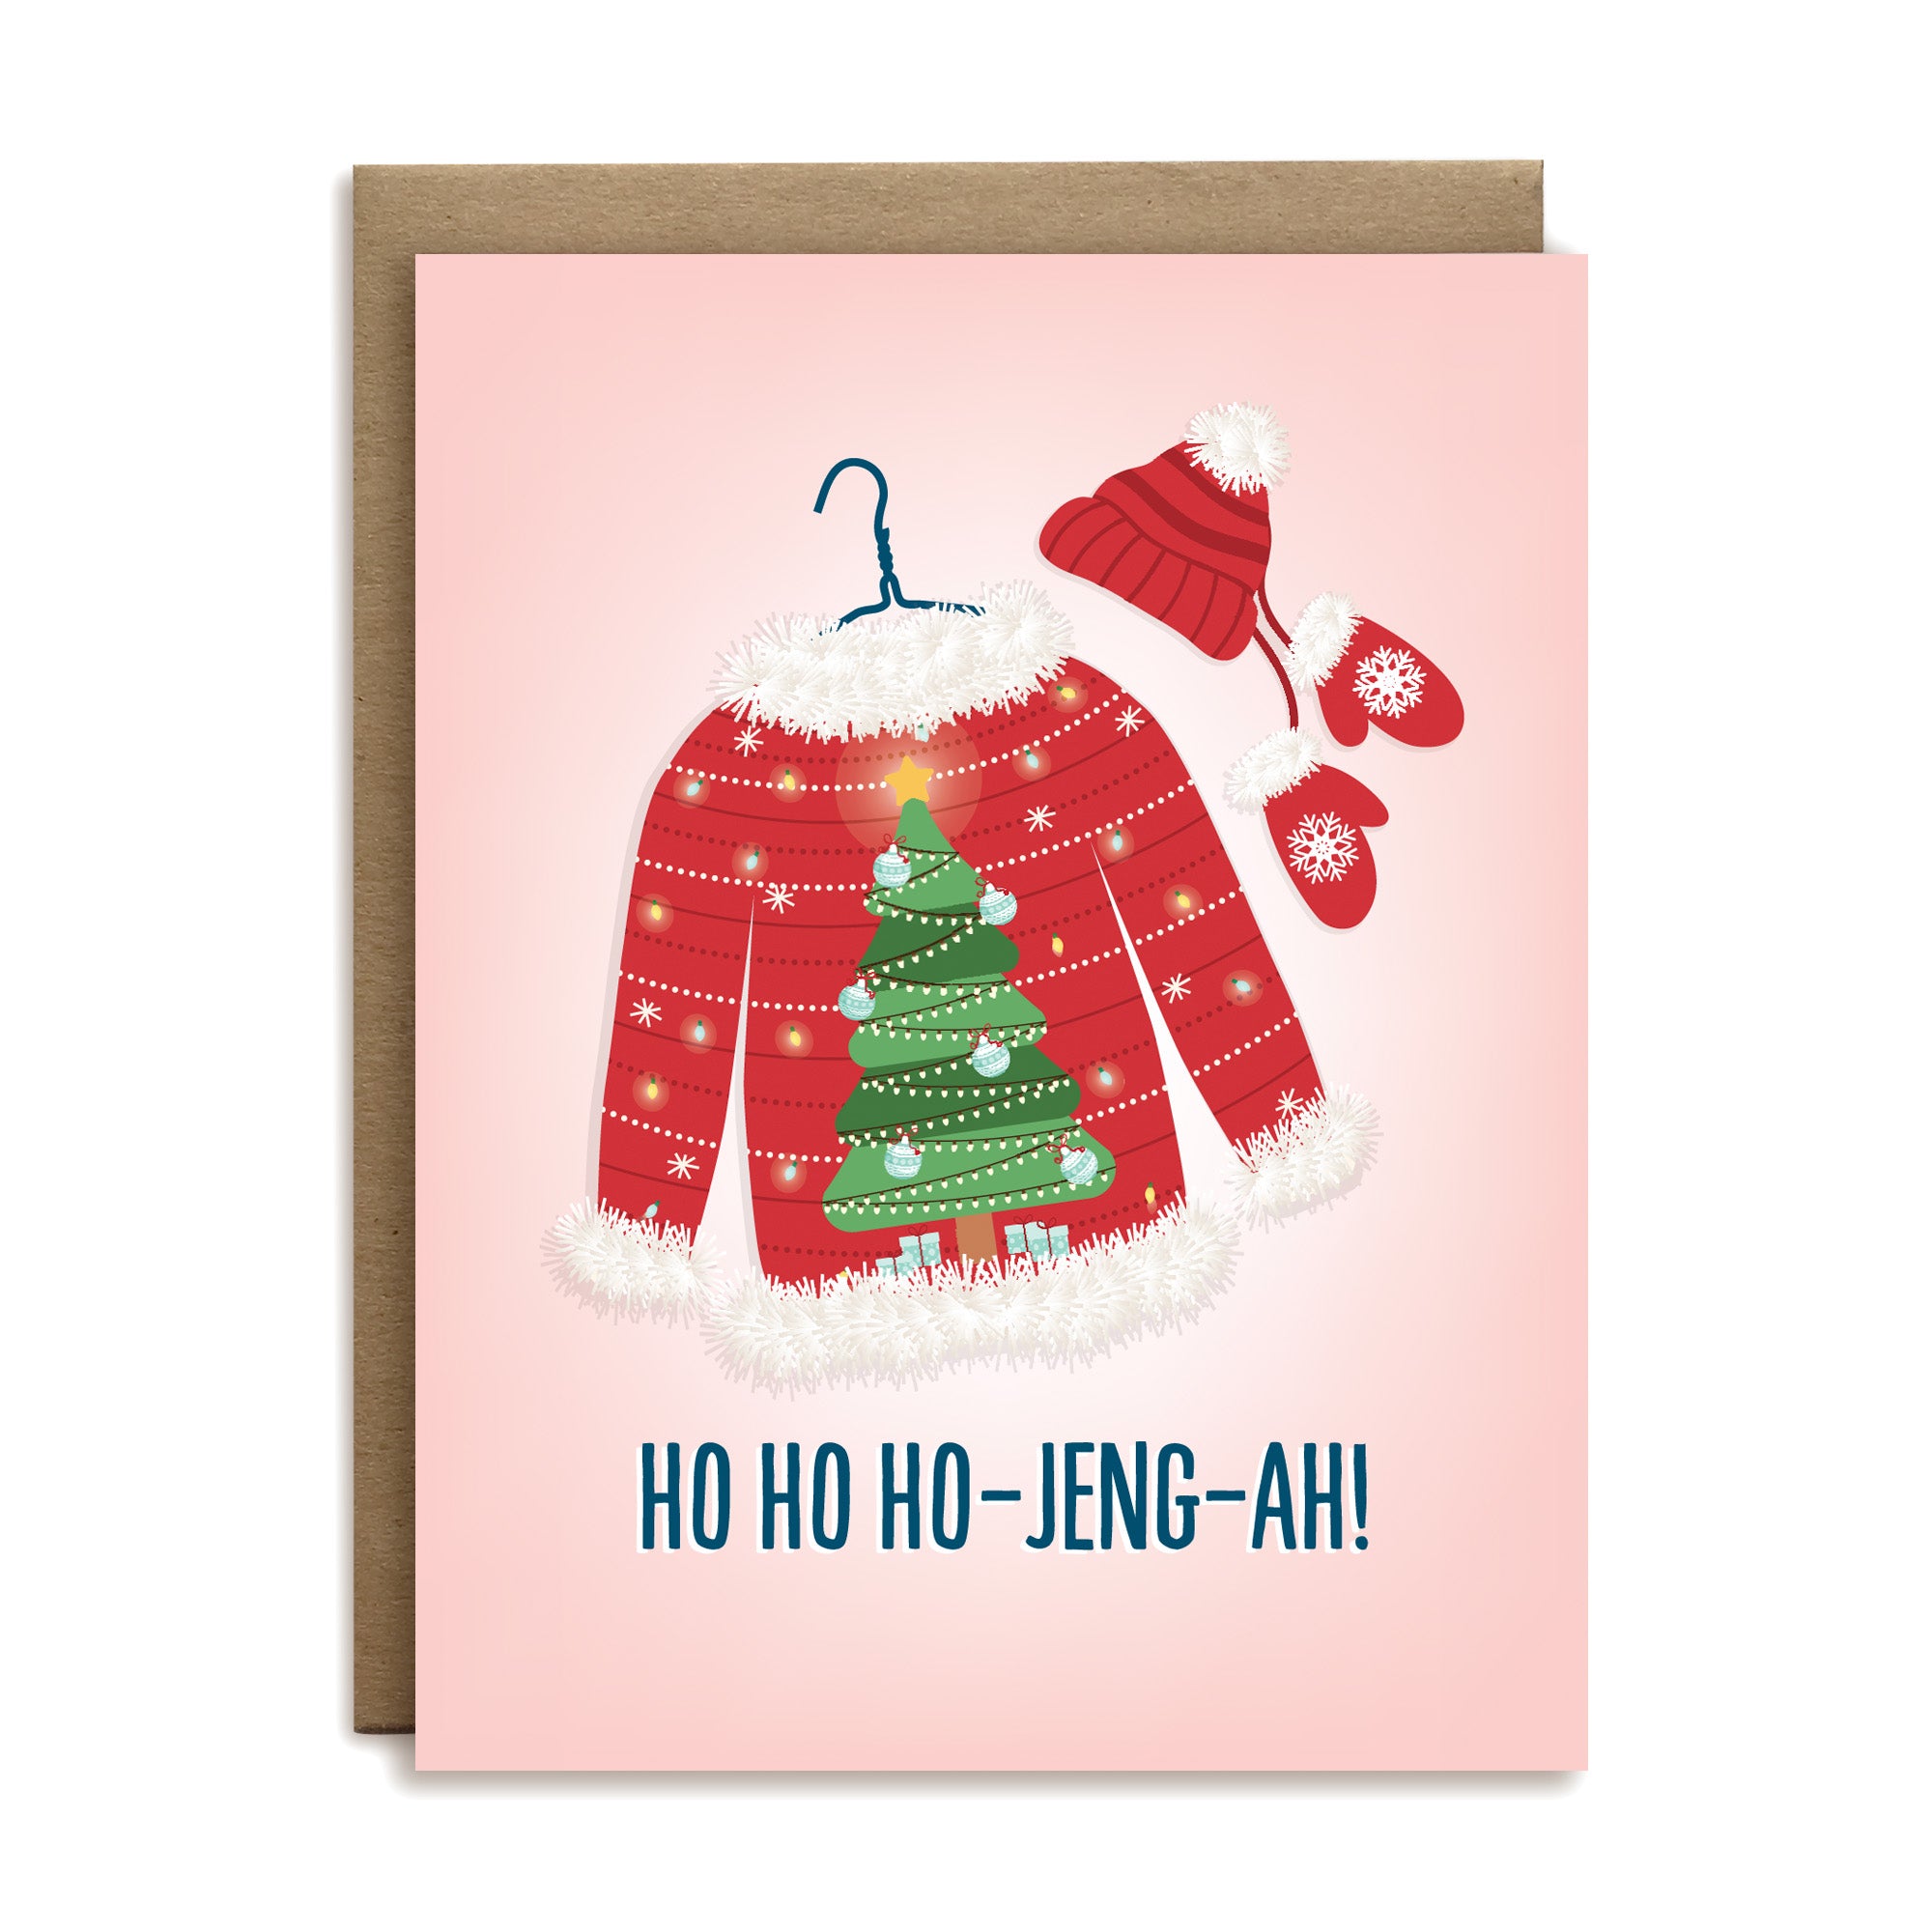 Ho ho ho-jeng-ah Cantonese ugly Christmas sweater holiday card by I’ll Know It When I See It